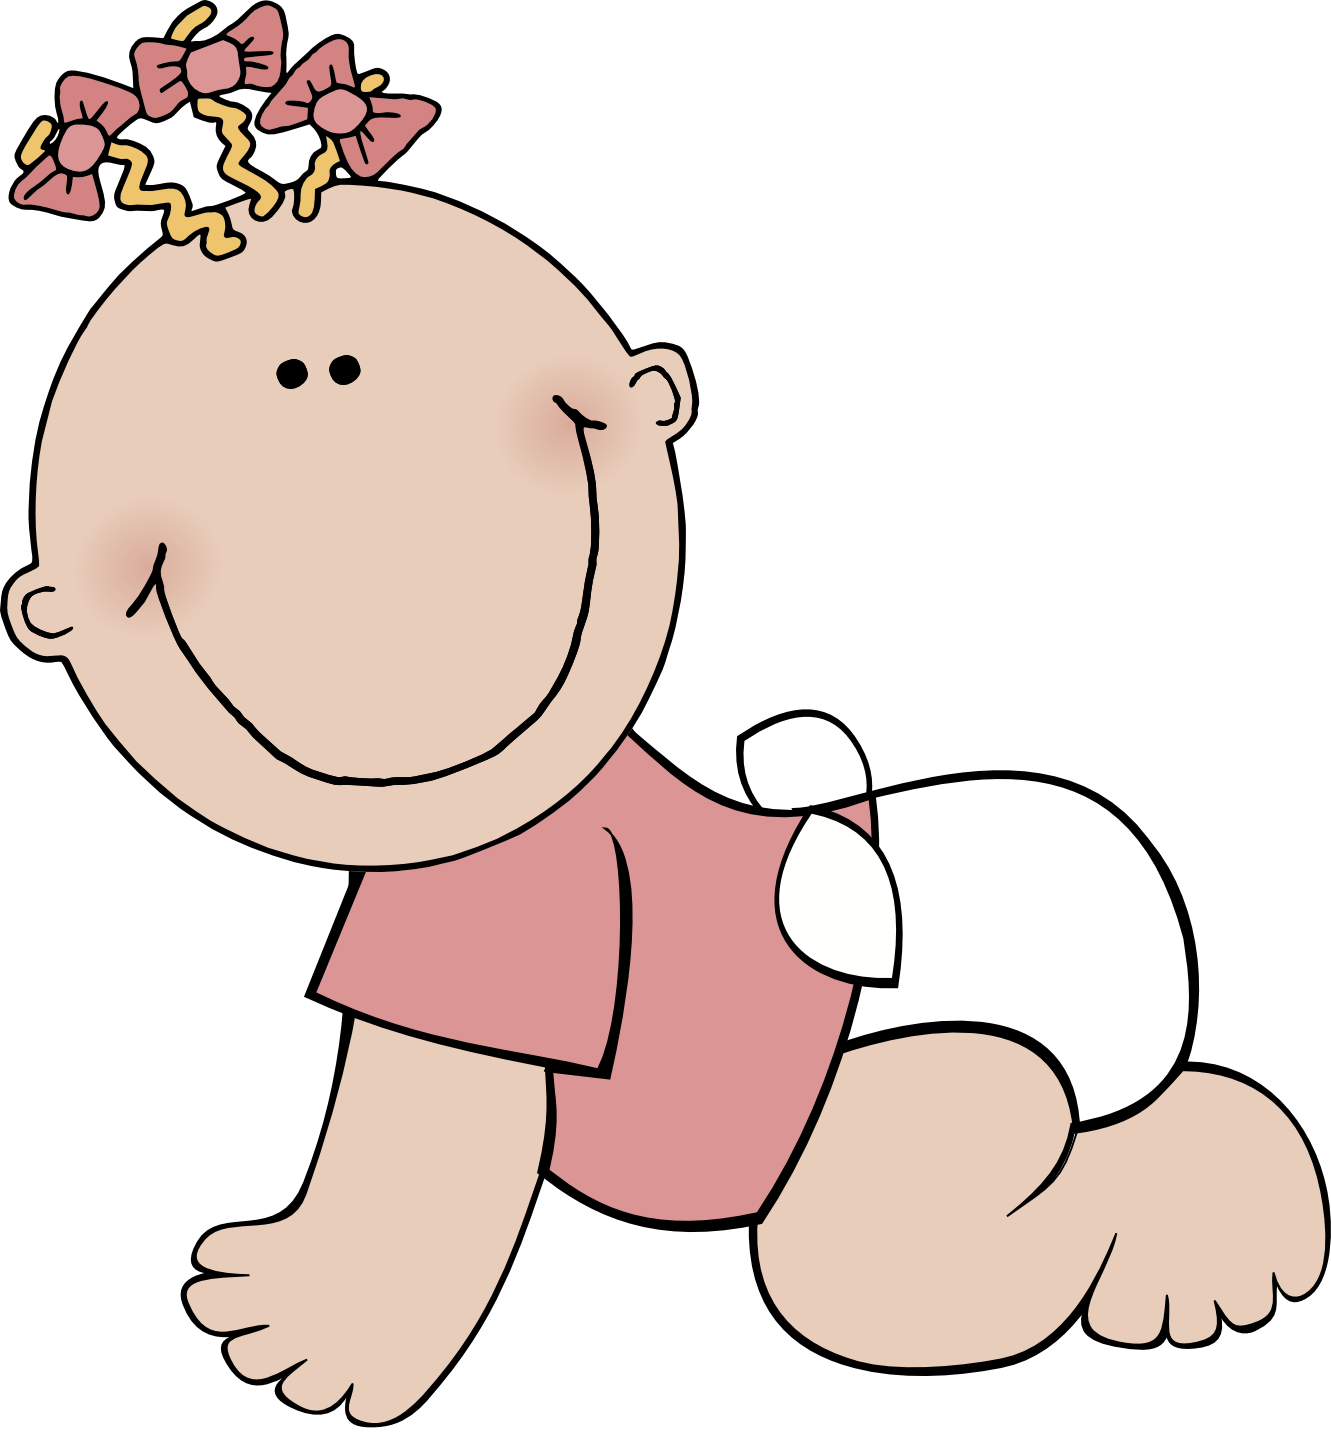 Twins clipart african american baby. Girl panda free images